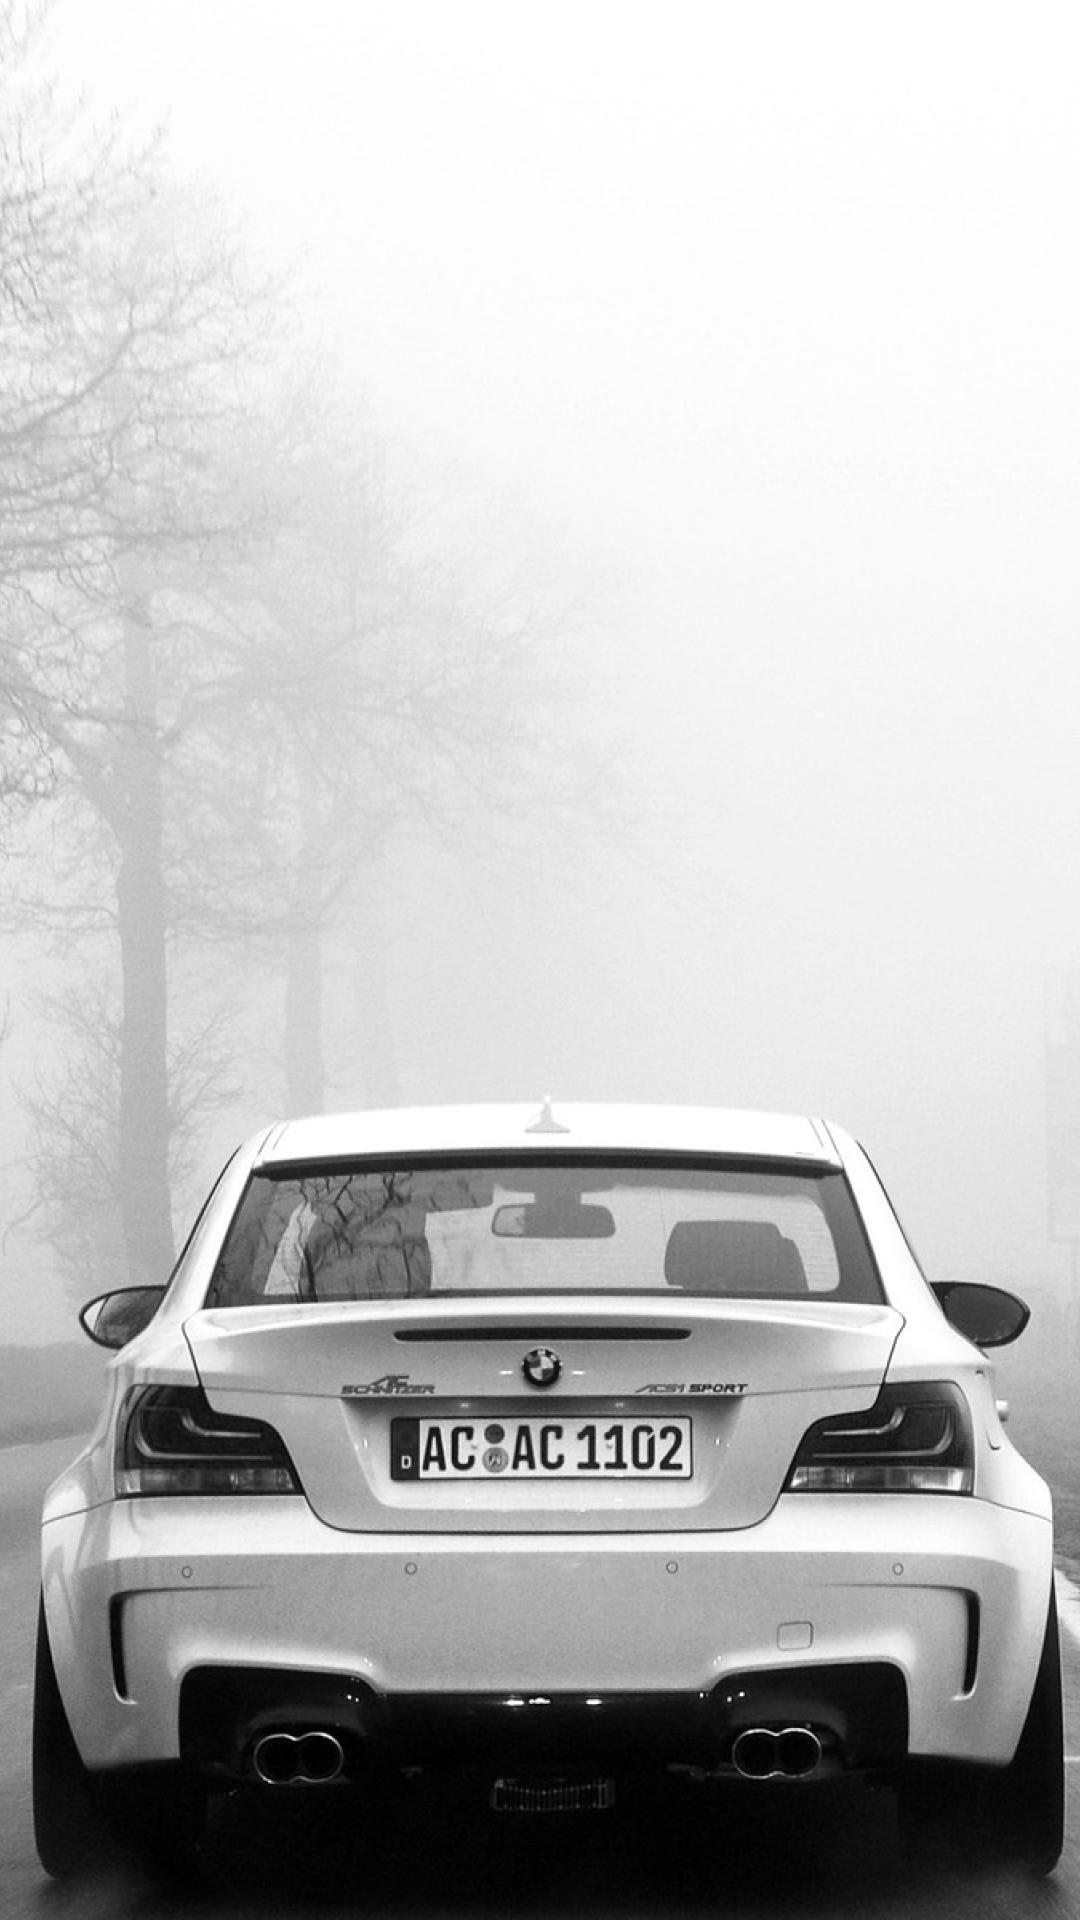 Bmw 135I Coupe Auto & Moto BMW iPhone 6 Plus Wallpaper. cars, Truck